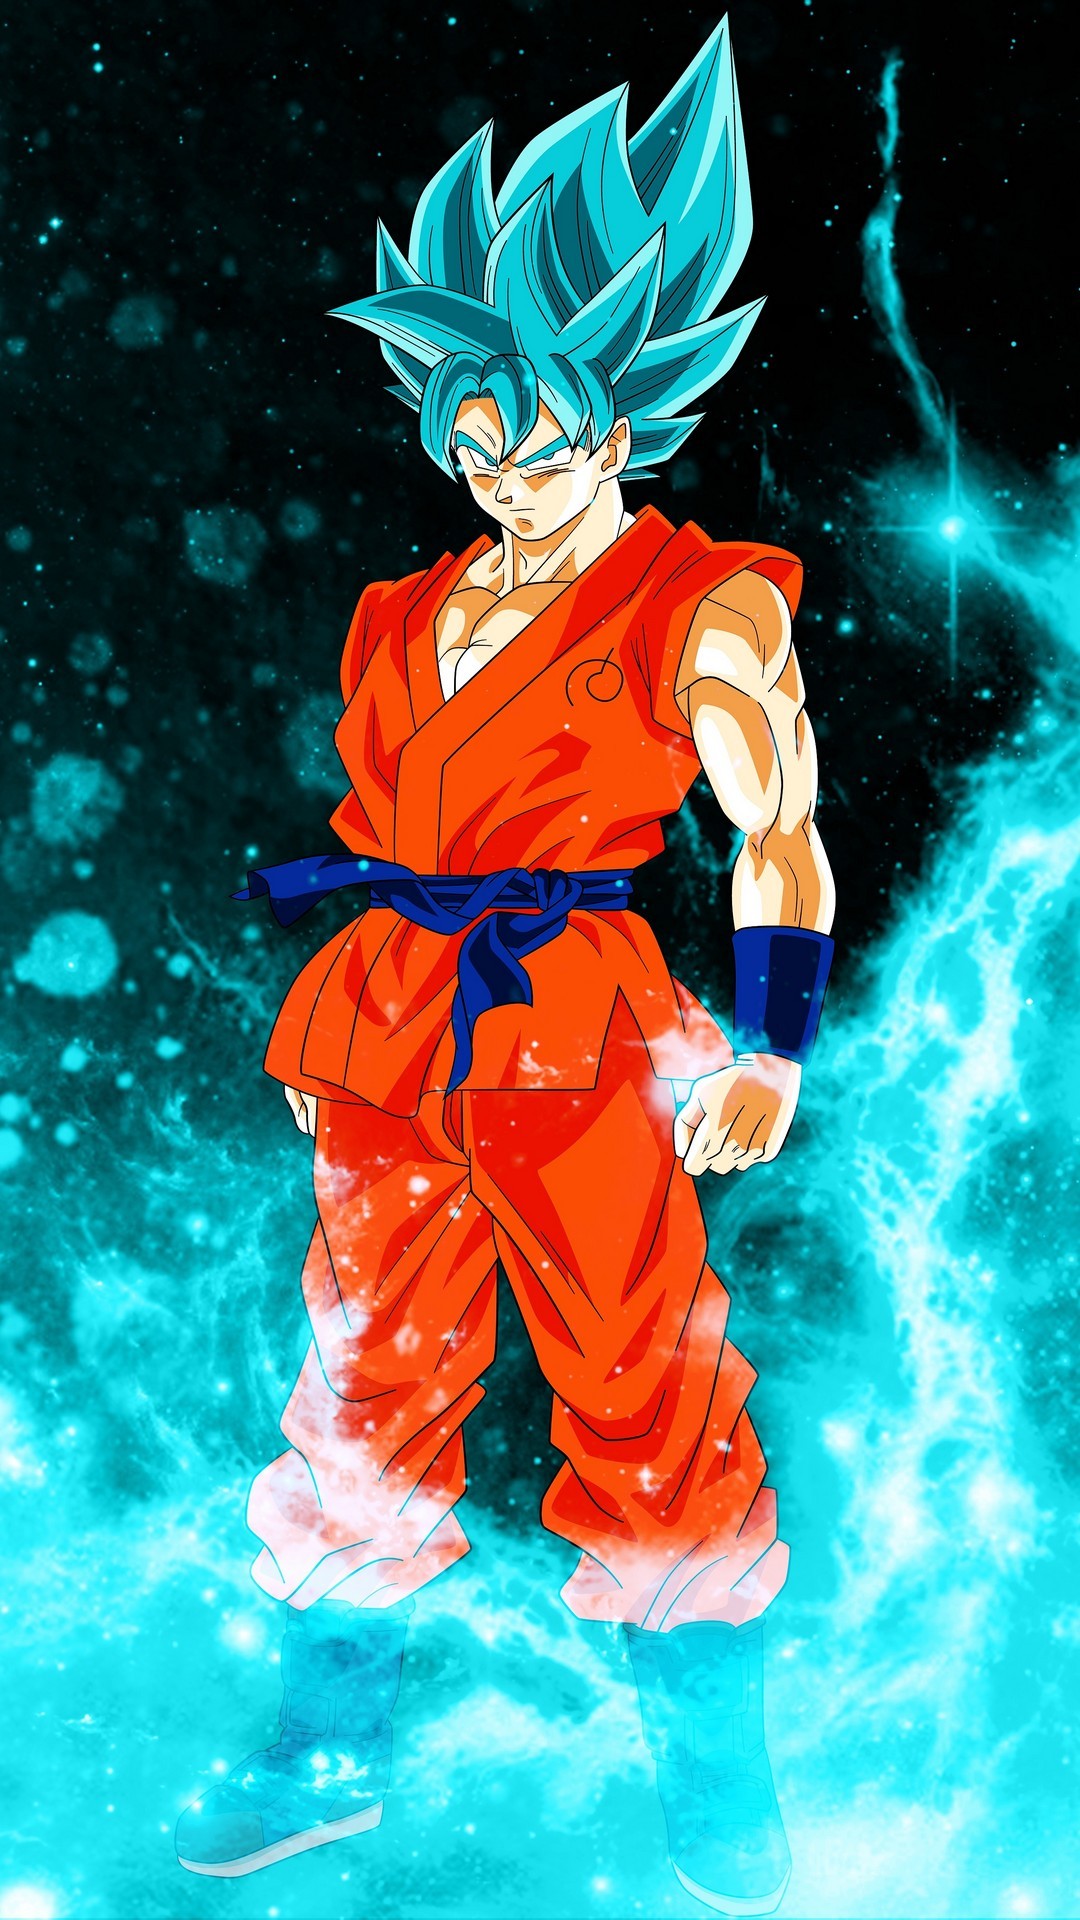 Goku SSJ Android Wallpaper with HD resolution 1080x1920